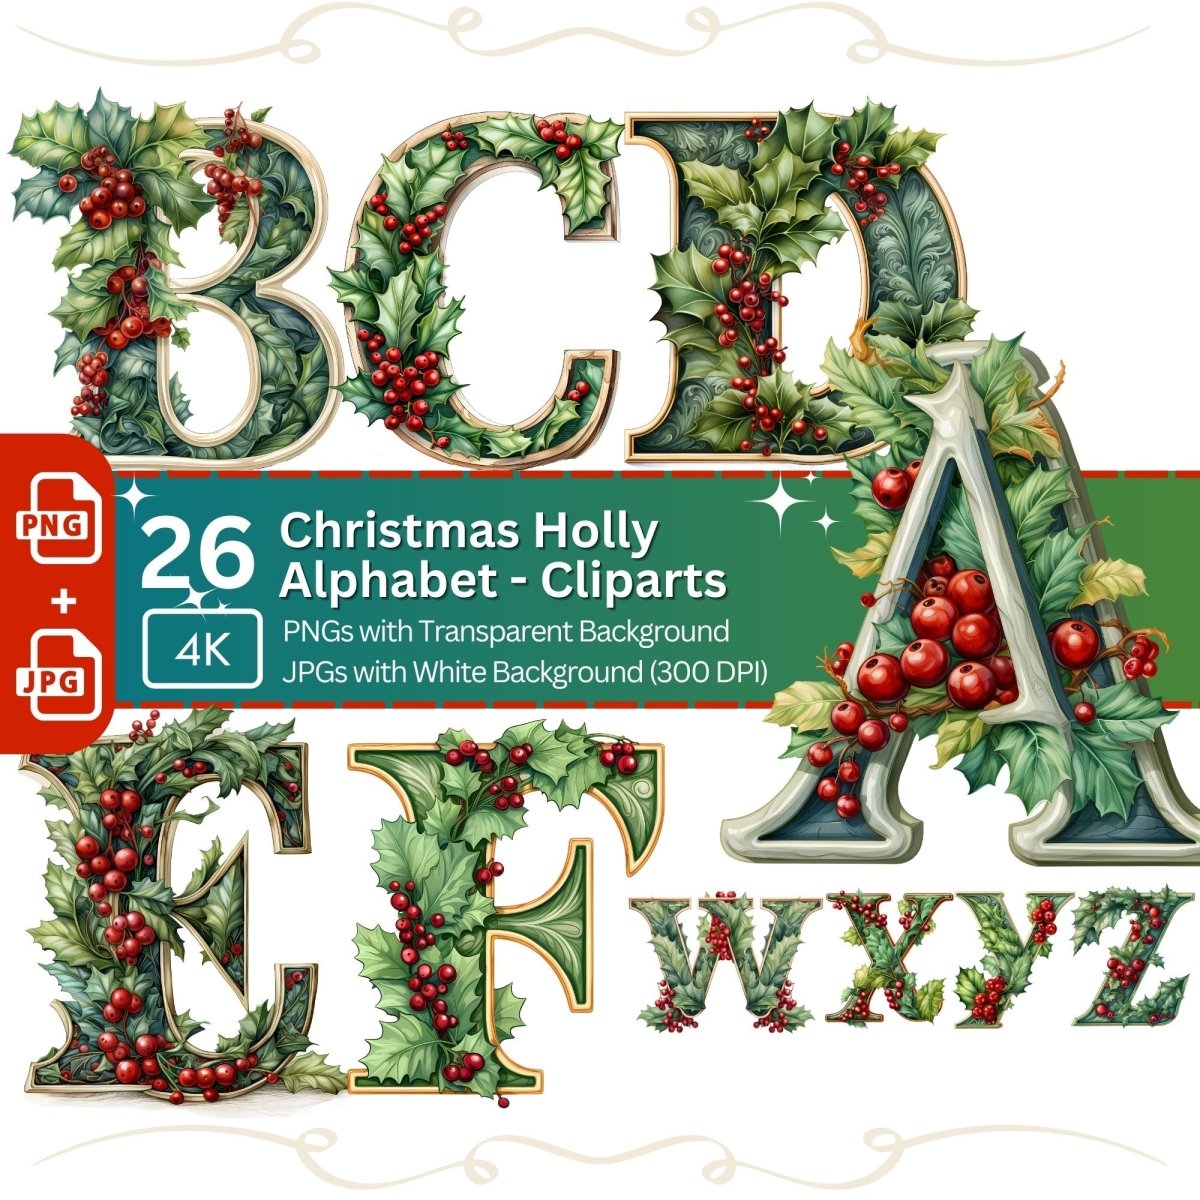 Christmas Holly Alphabet Clipart 26x PNG Bundle Christmas Font Clipart Card Making Design Digital Paper Craft Holiday Letter Graphic - Everything Pixel